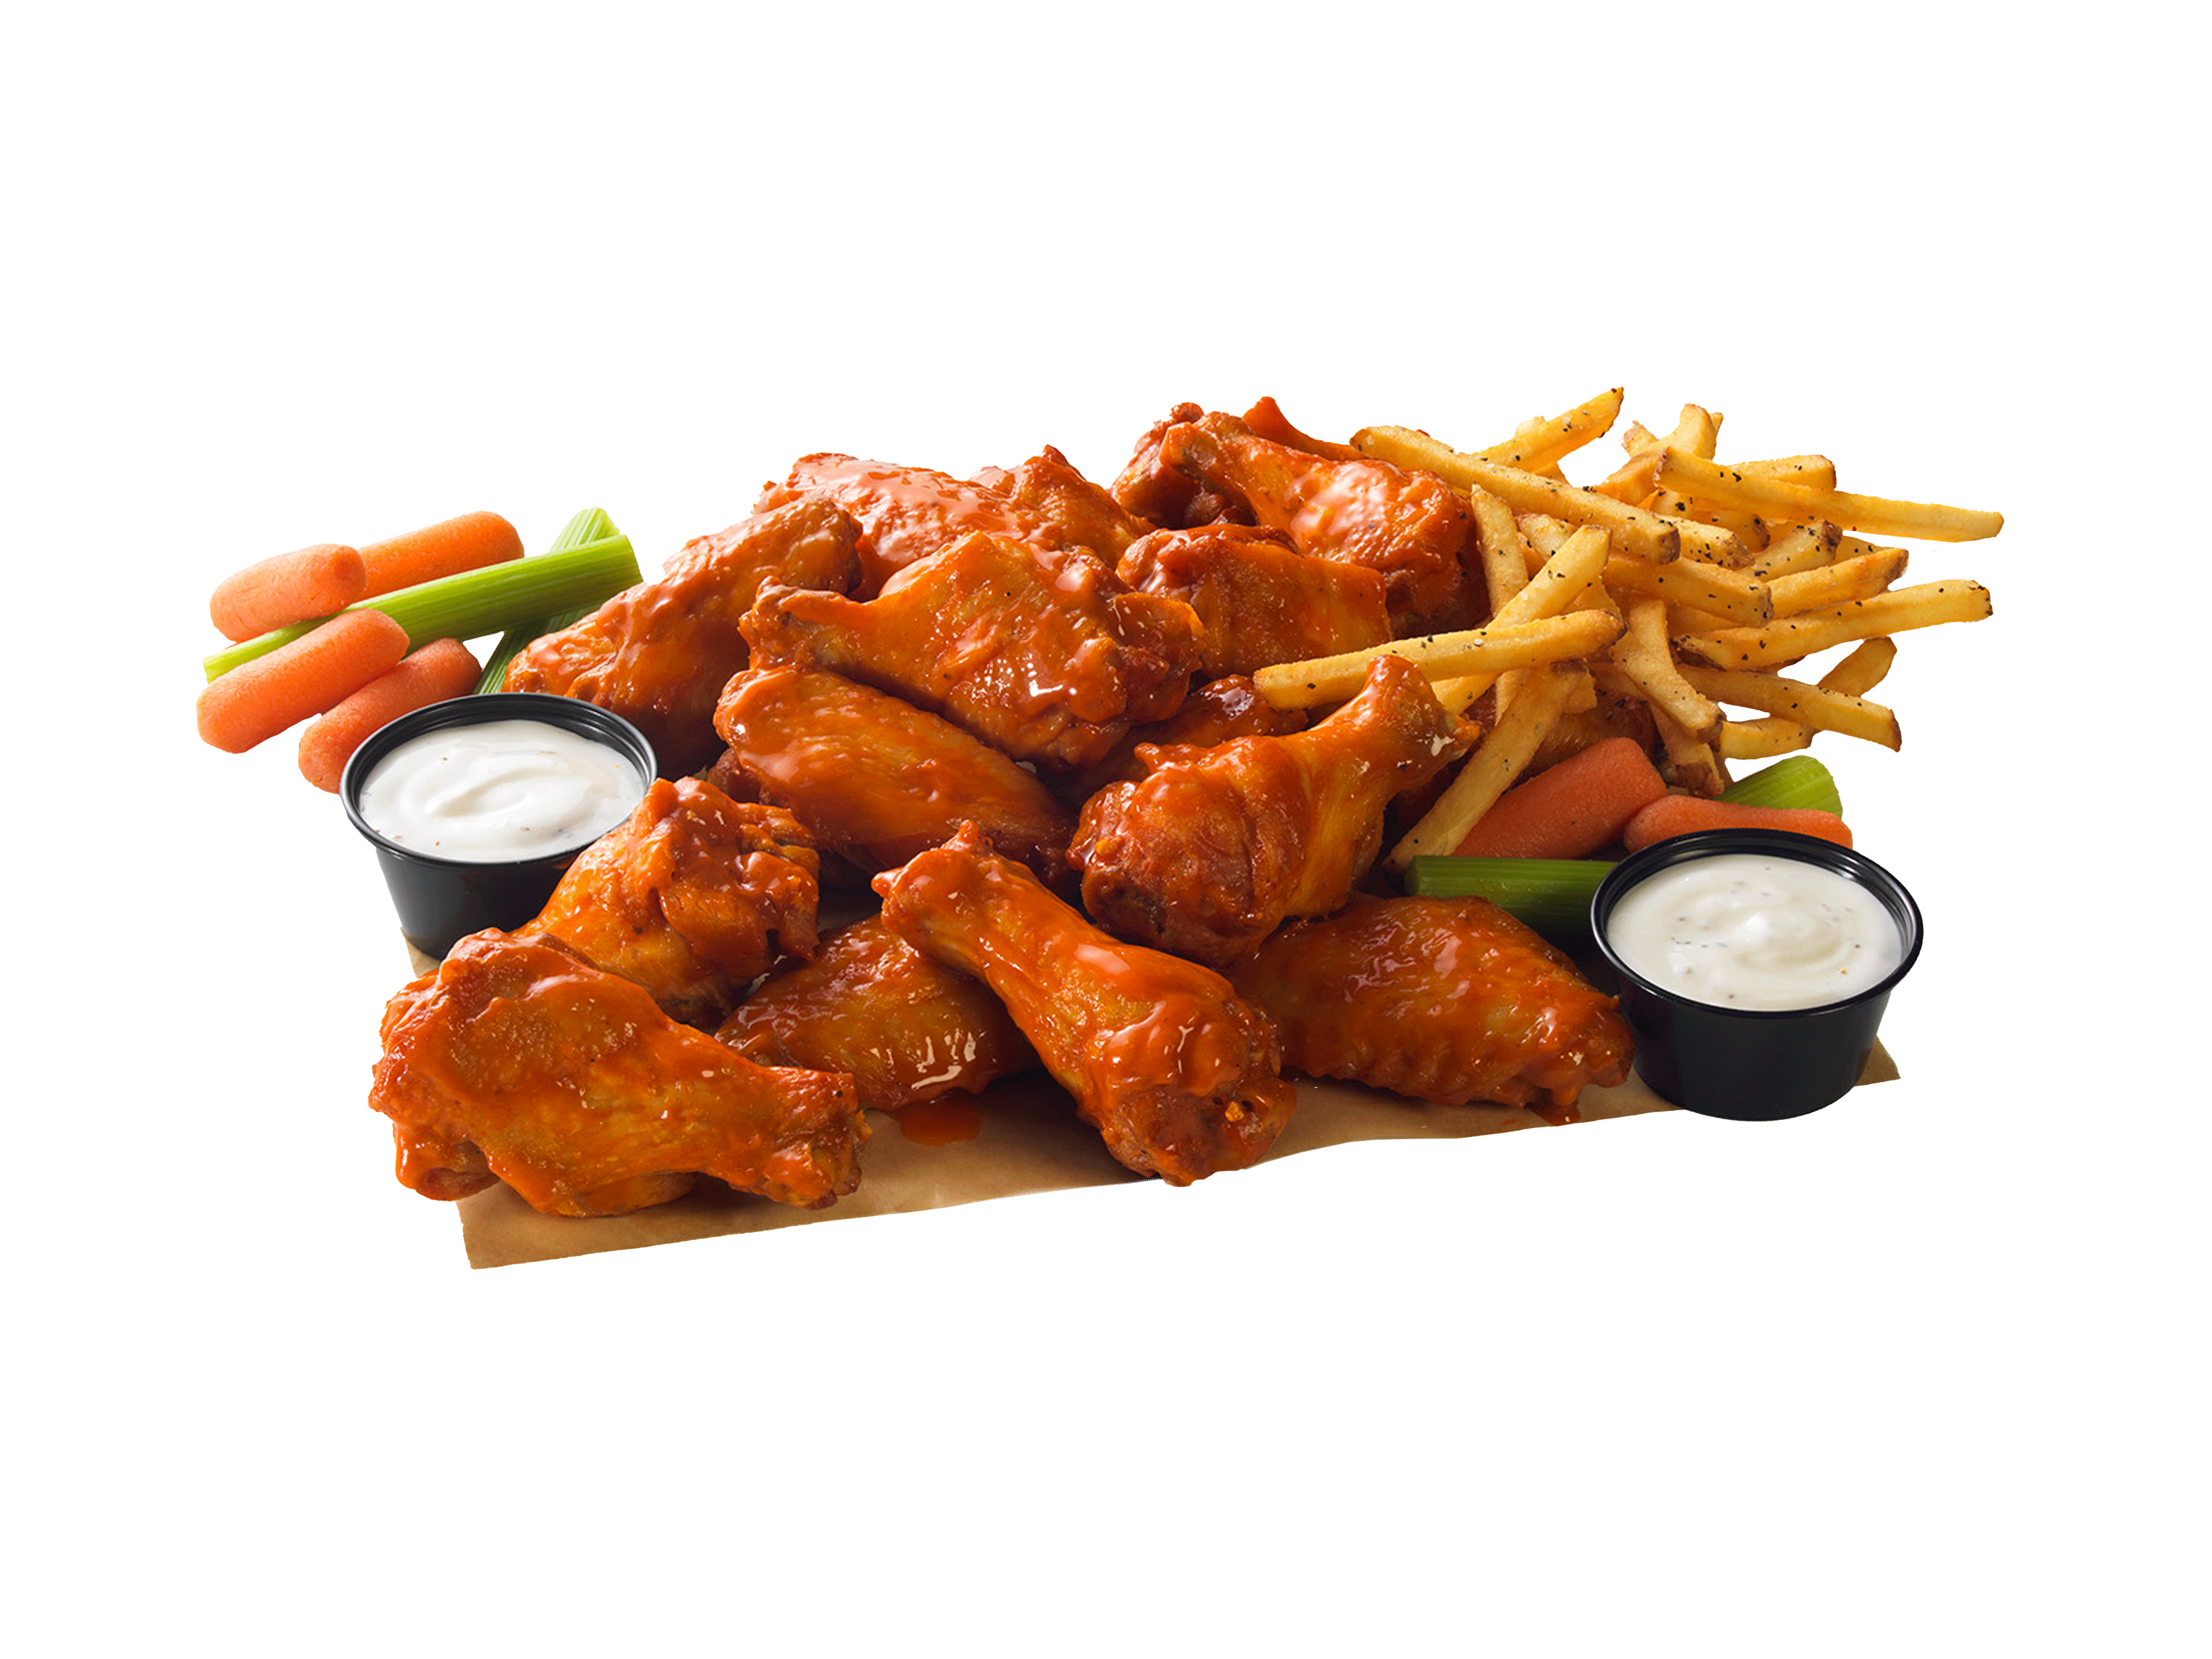 hot wings and french fries